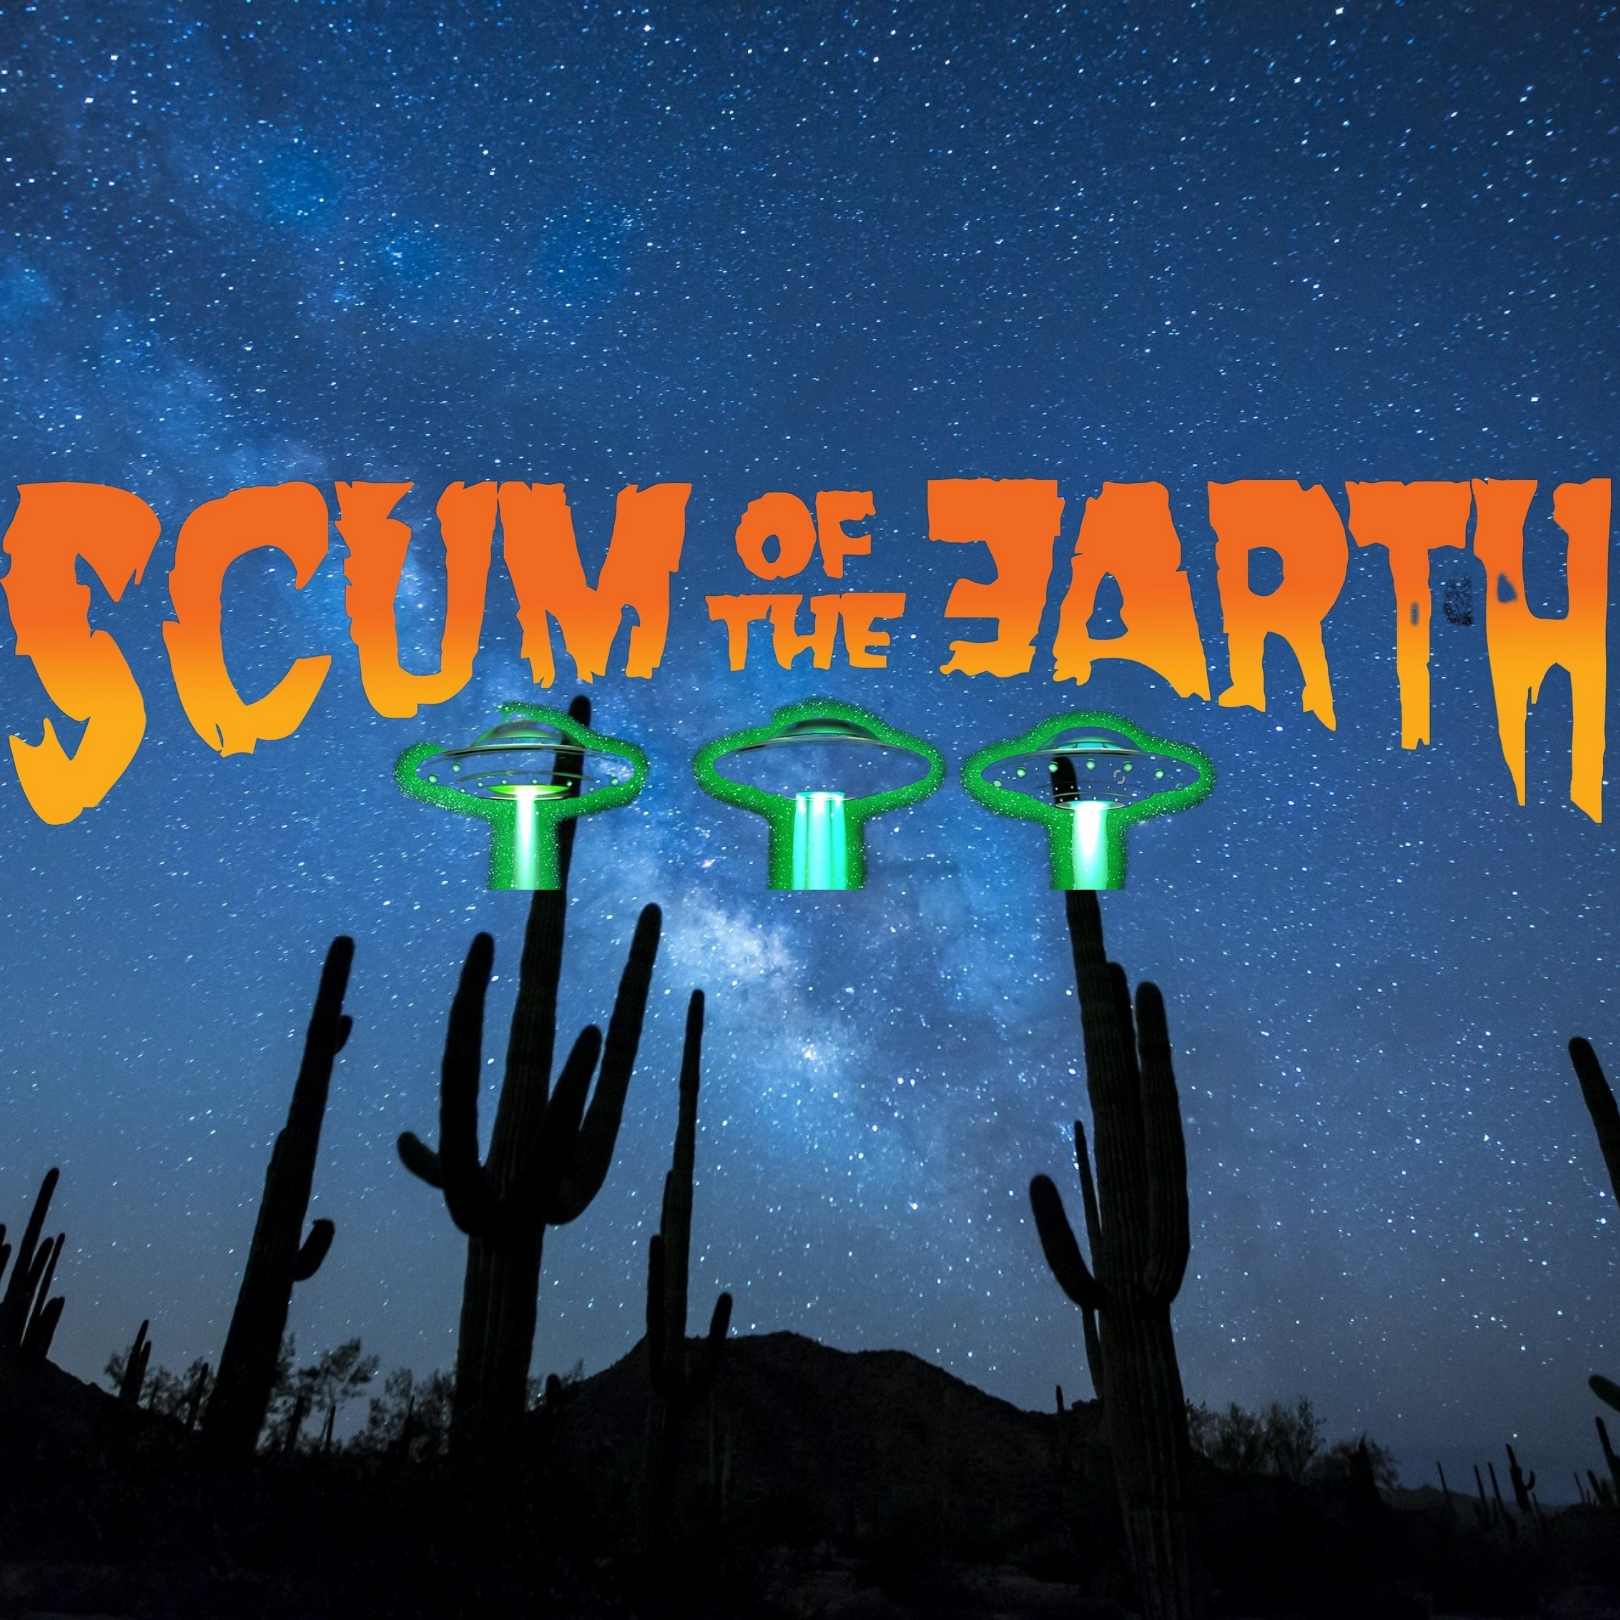 Former Rob Zombie guitarist Riggs talks about his band Scum Of The Earth Image